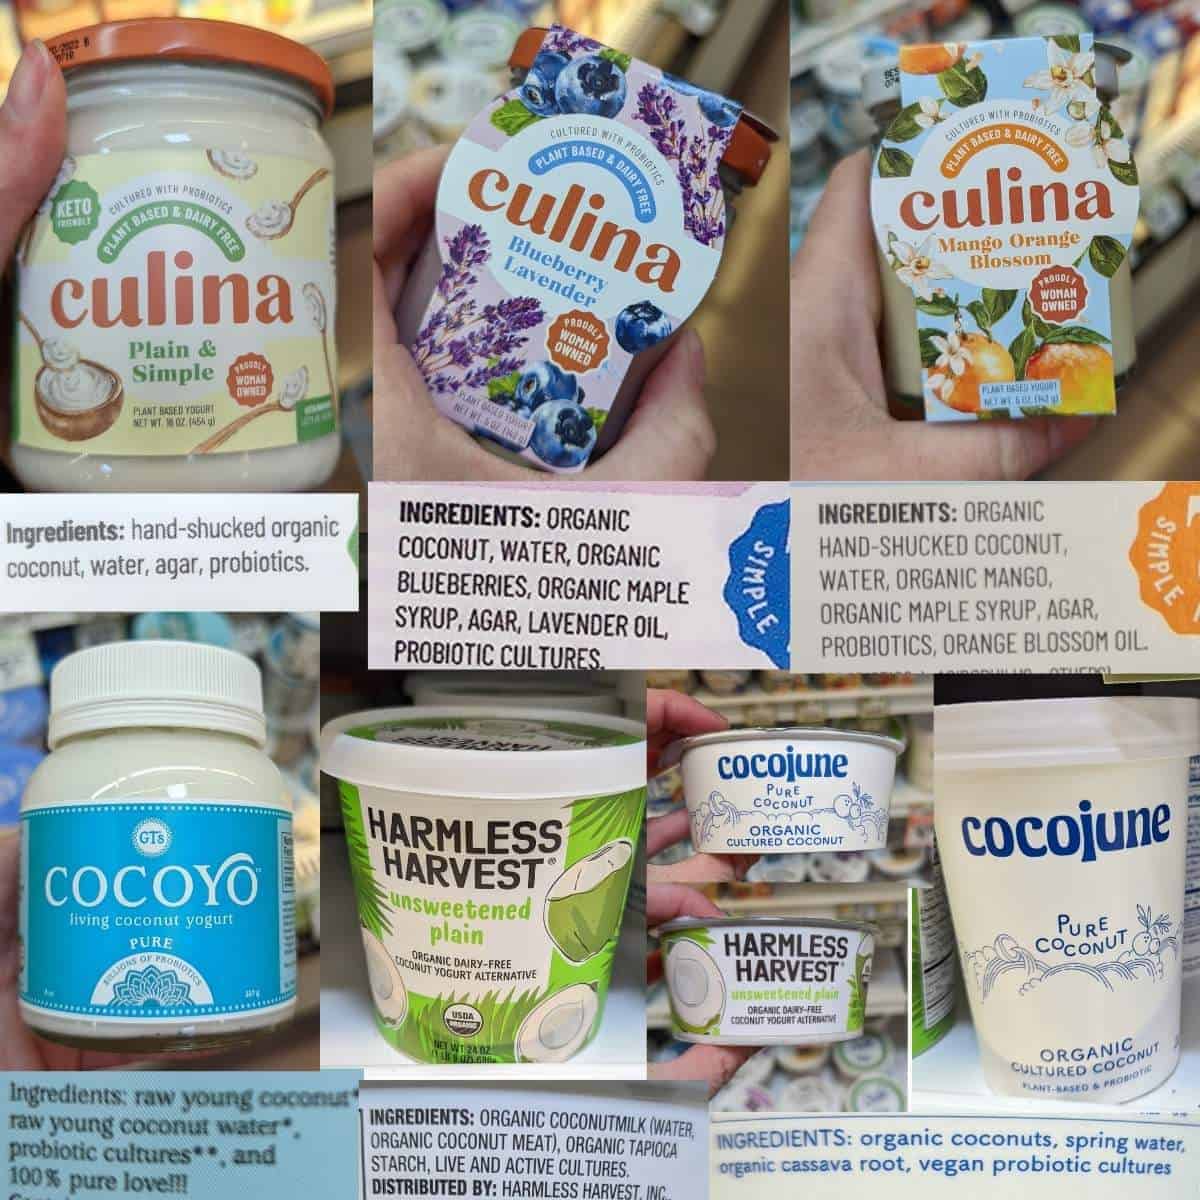 Culina, cocoyo, cocojune and harmless harvest yogurt with nutrition labels.